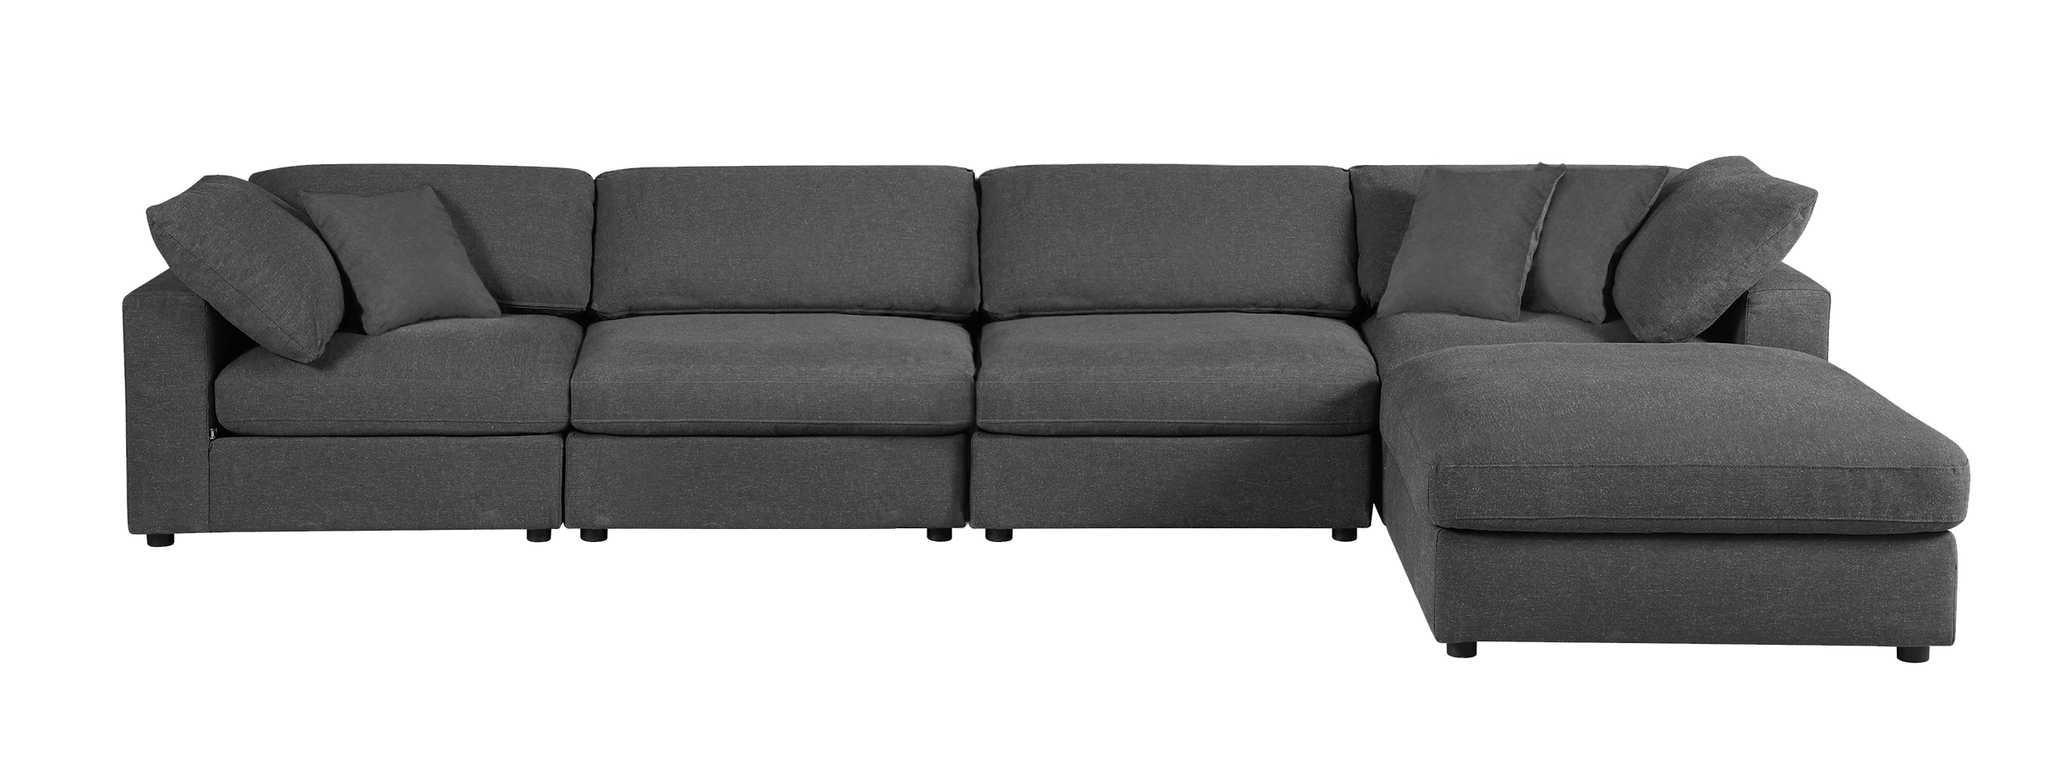 Ollie 5 Piece Sectional, Grey